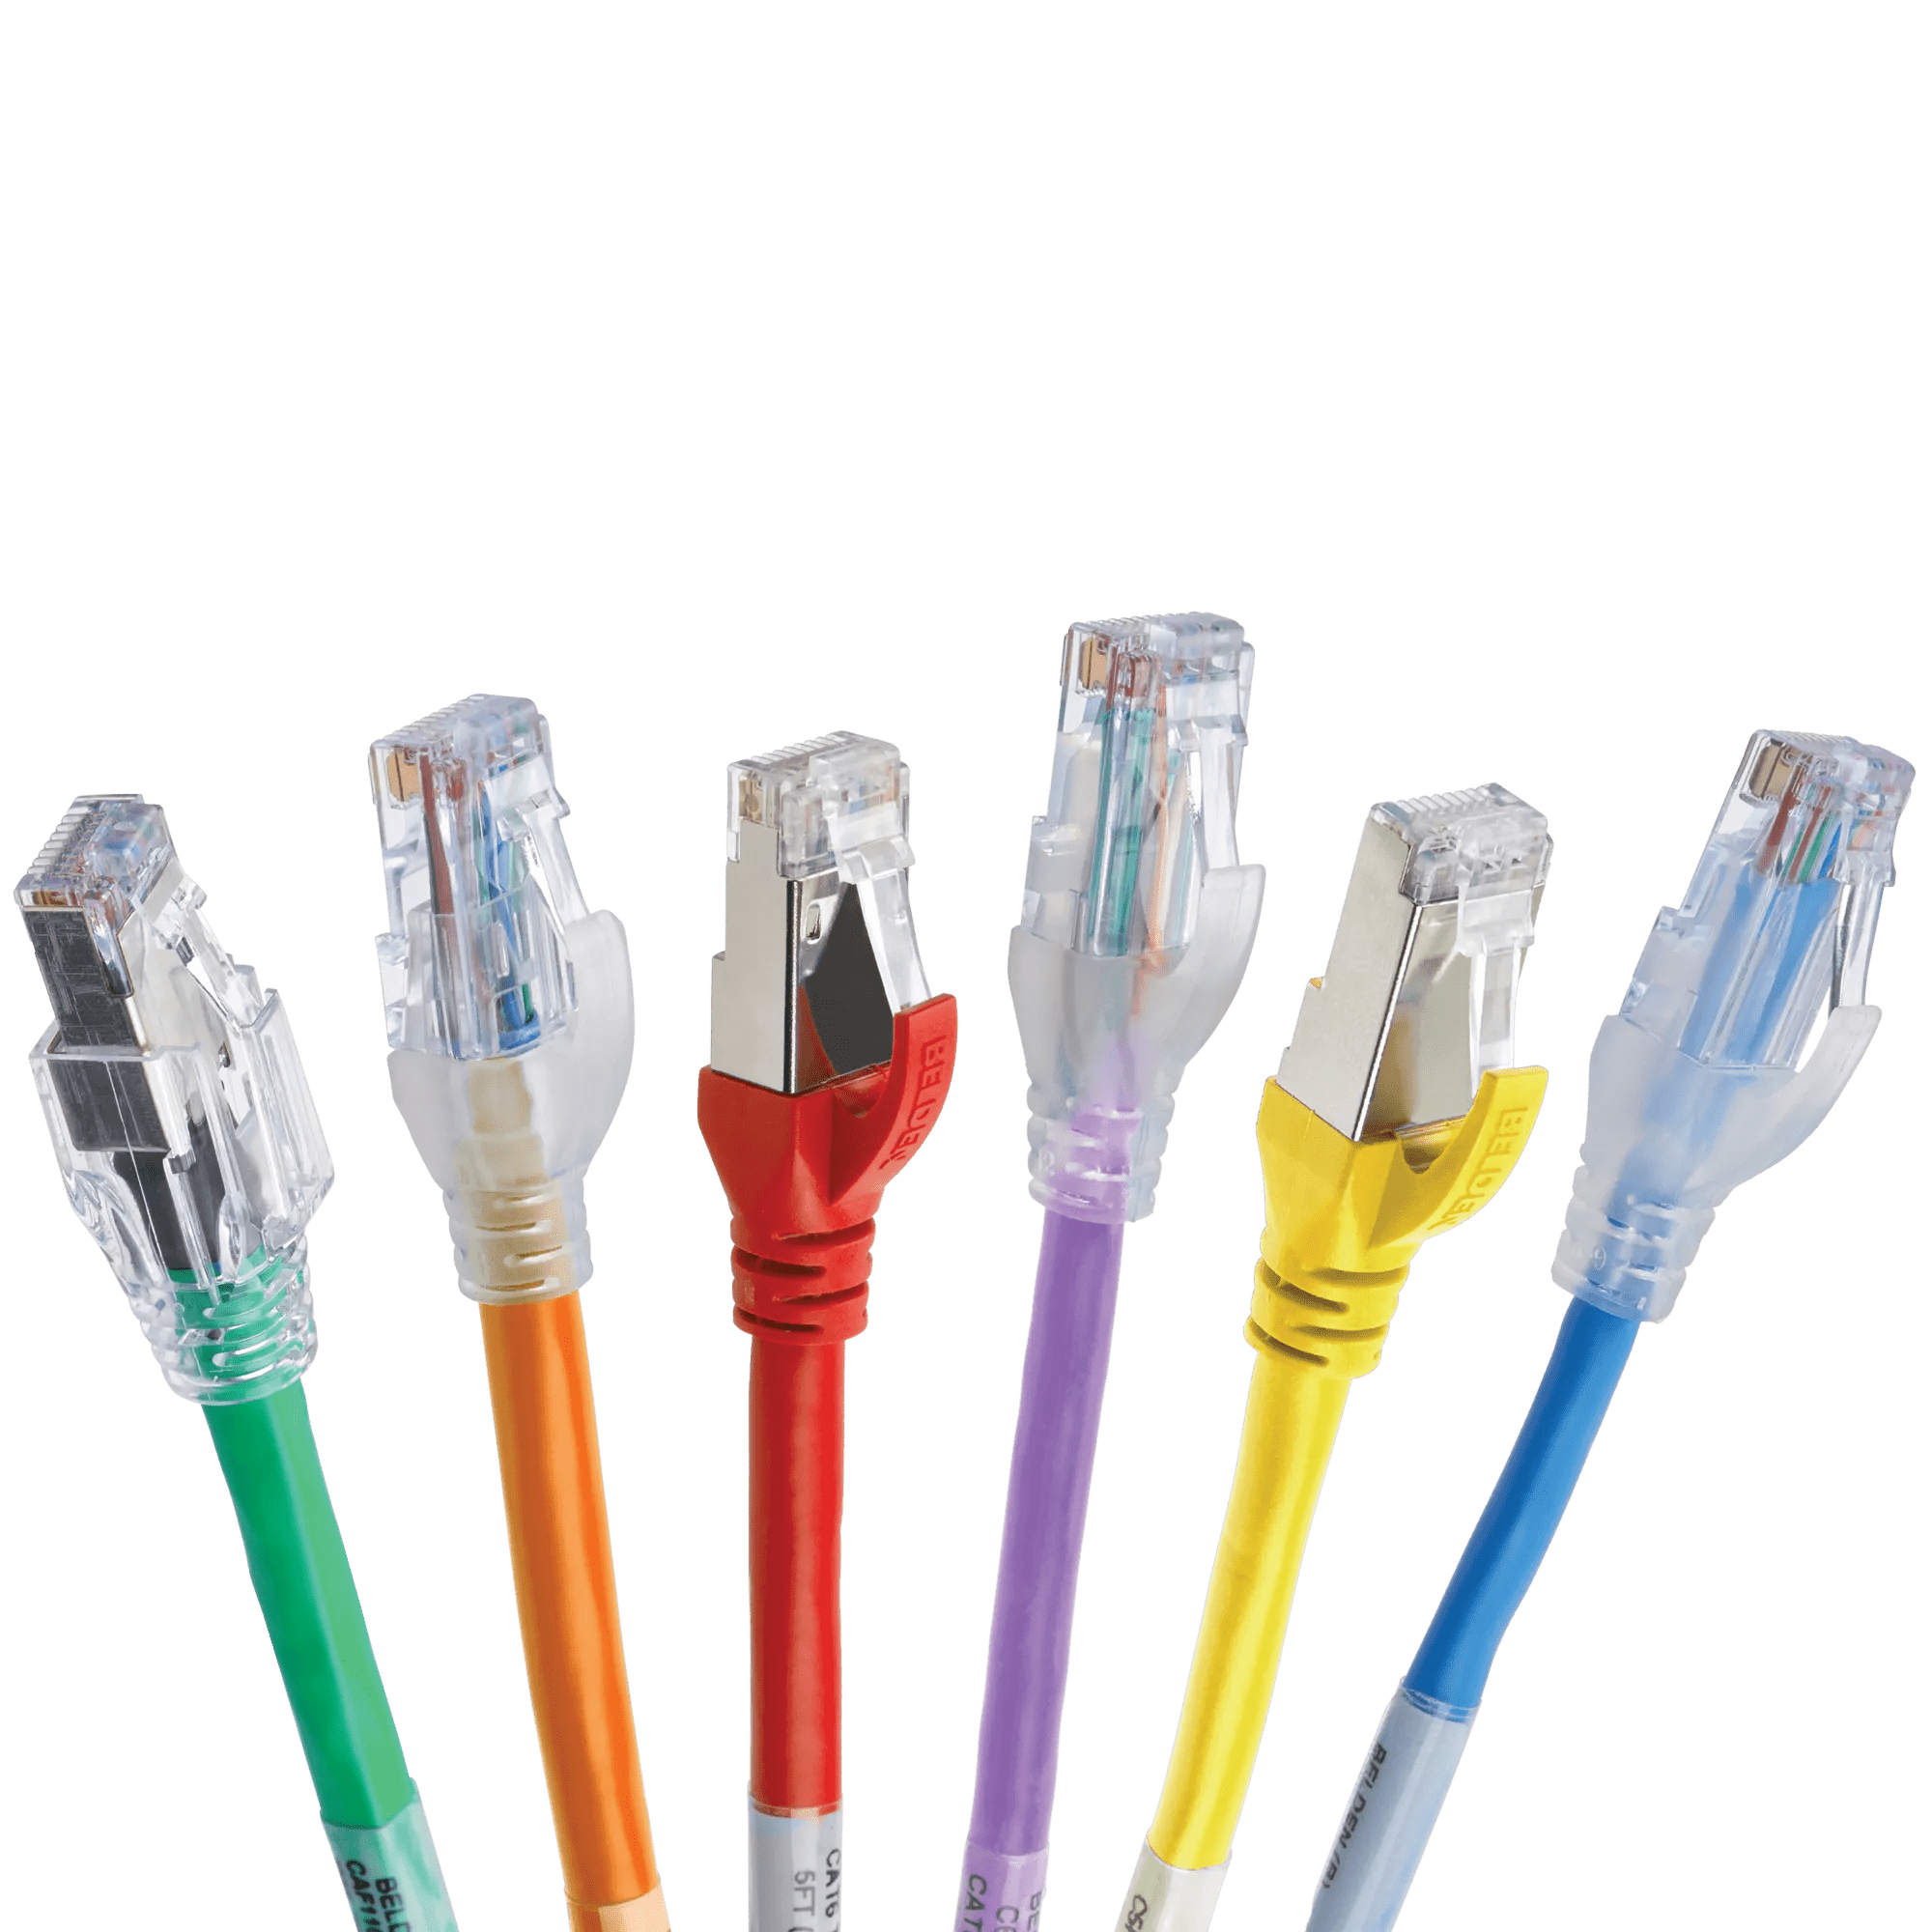 1ft Cat6 Thin Short Ethernet Patch Cable, Snagless & Unshielded, Blue -   Europe